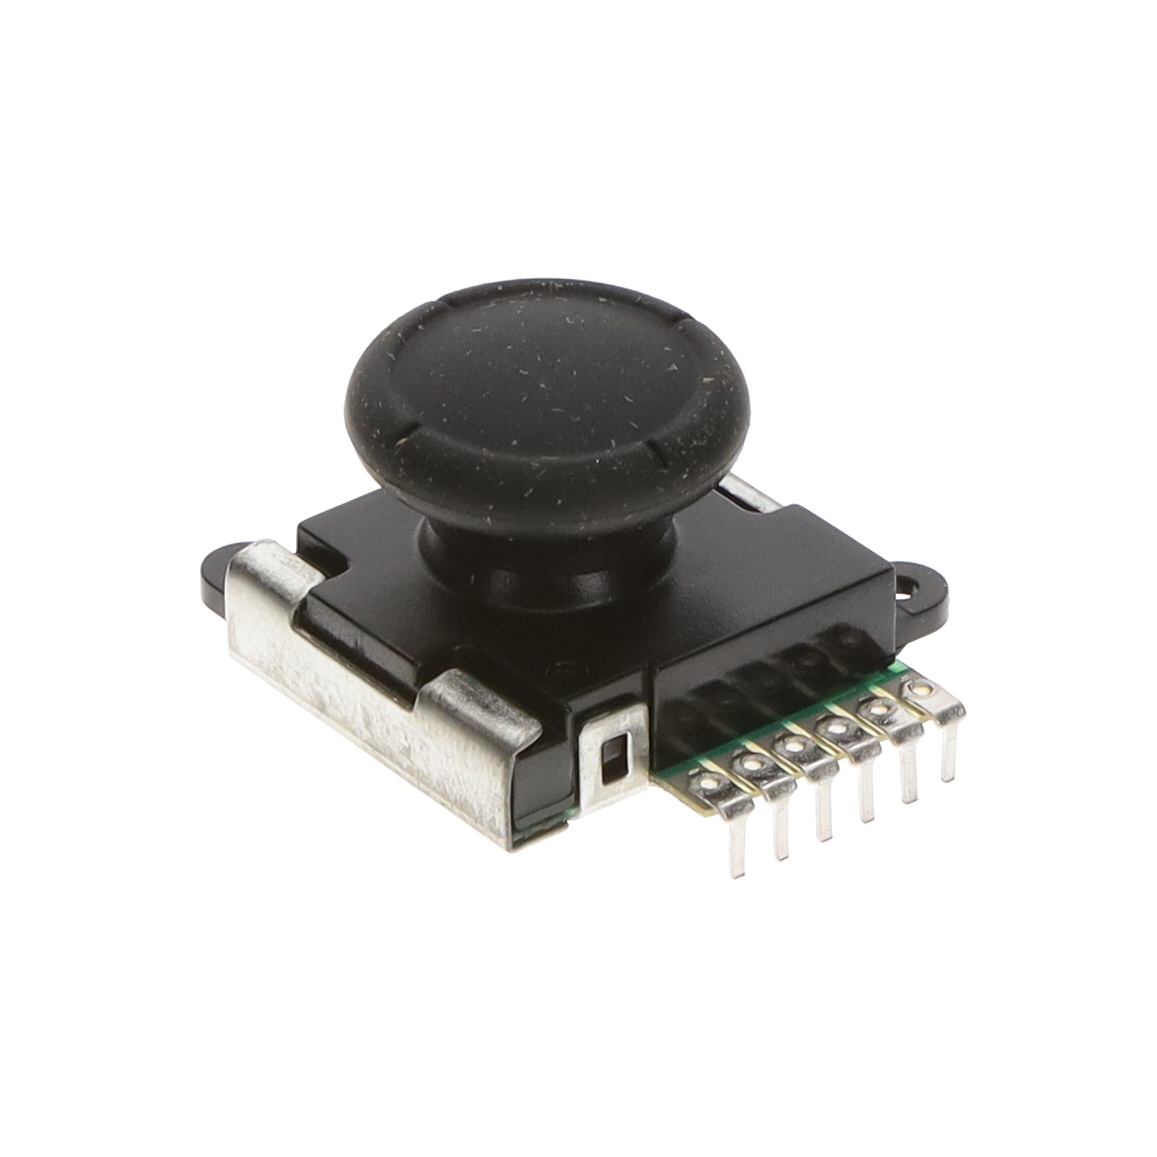 【5628】SWITCH THUMBSTICK PUCK ANALOG